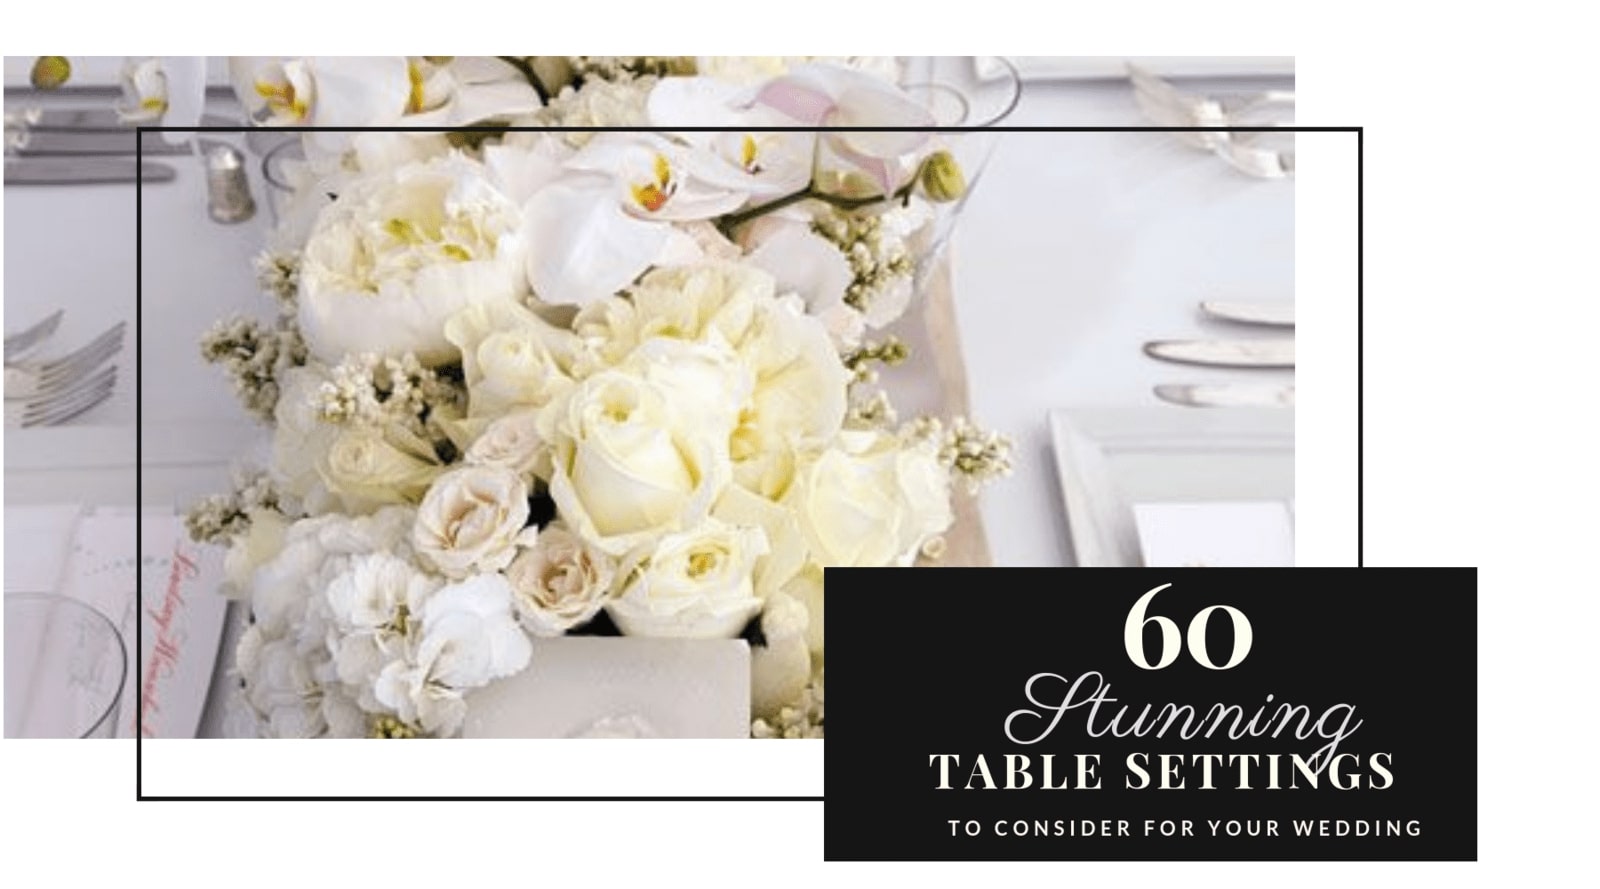 60 Stunning Table Settings for Weddings and Events